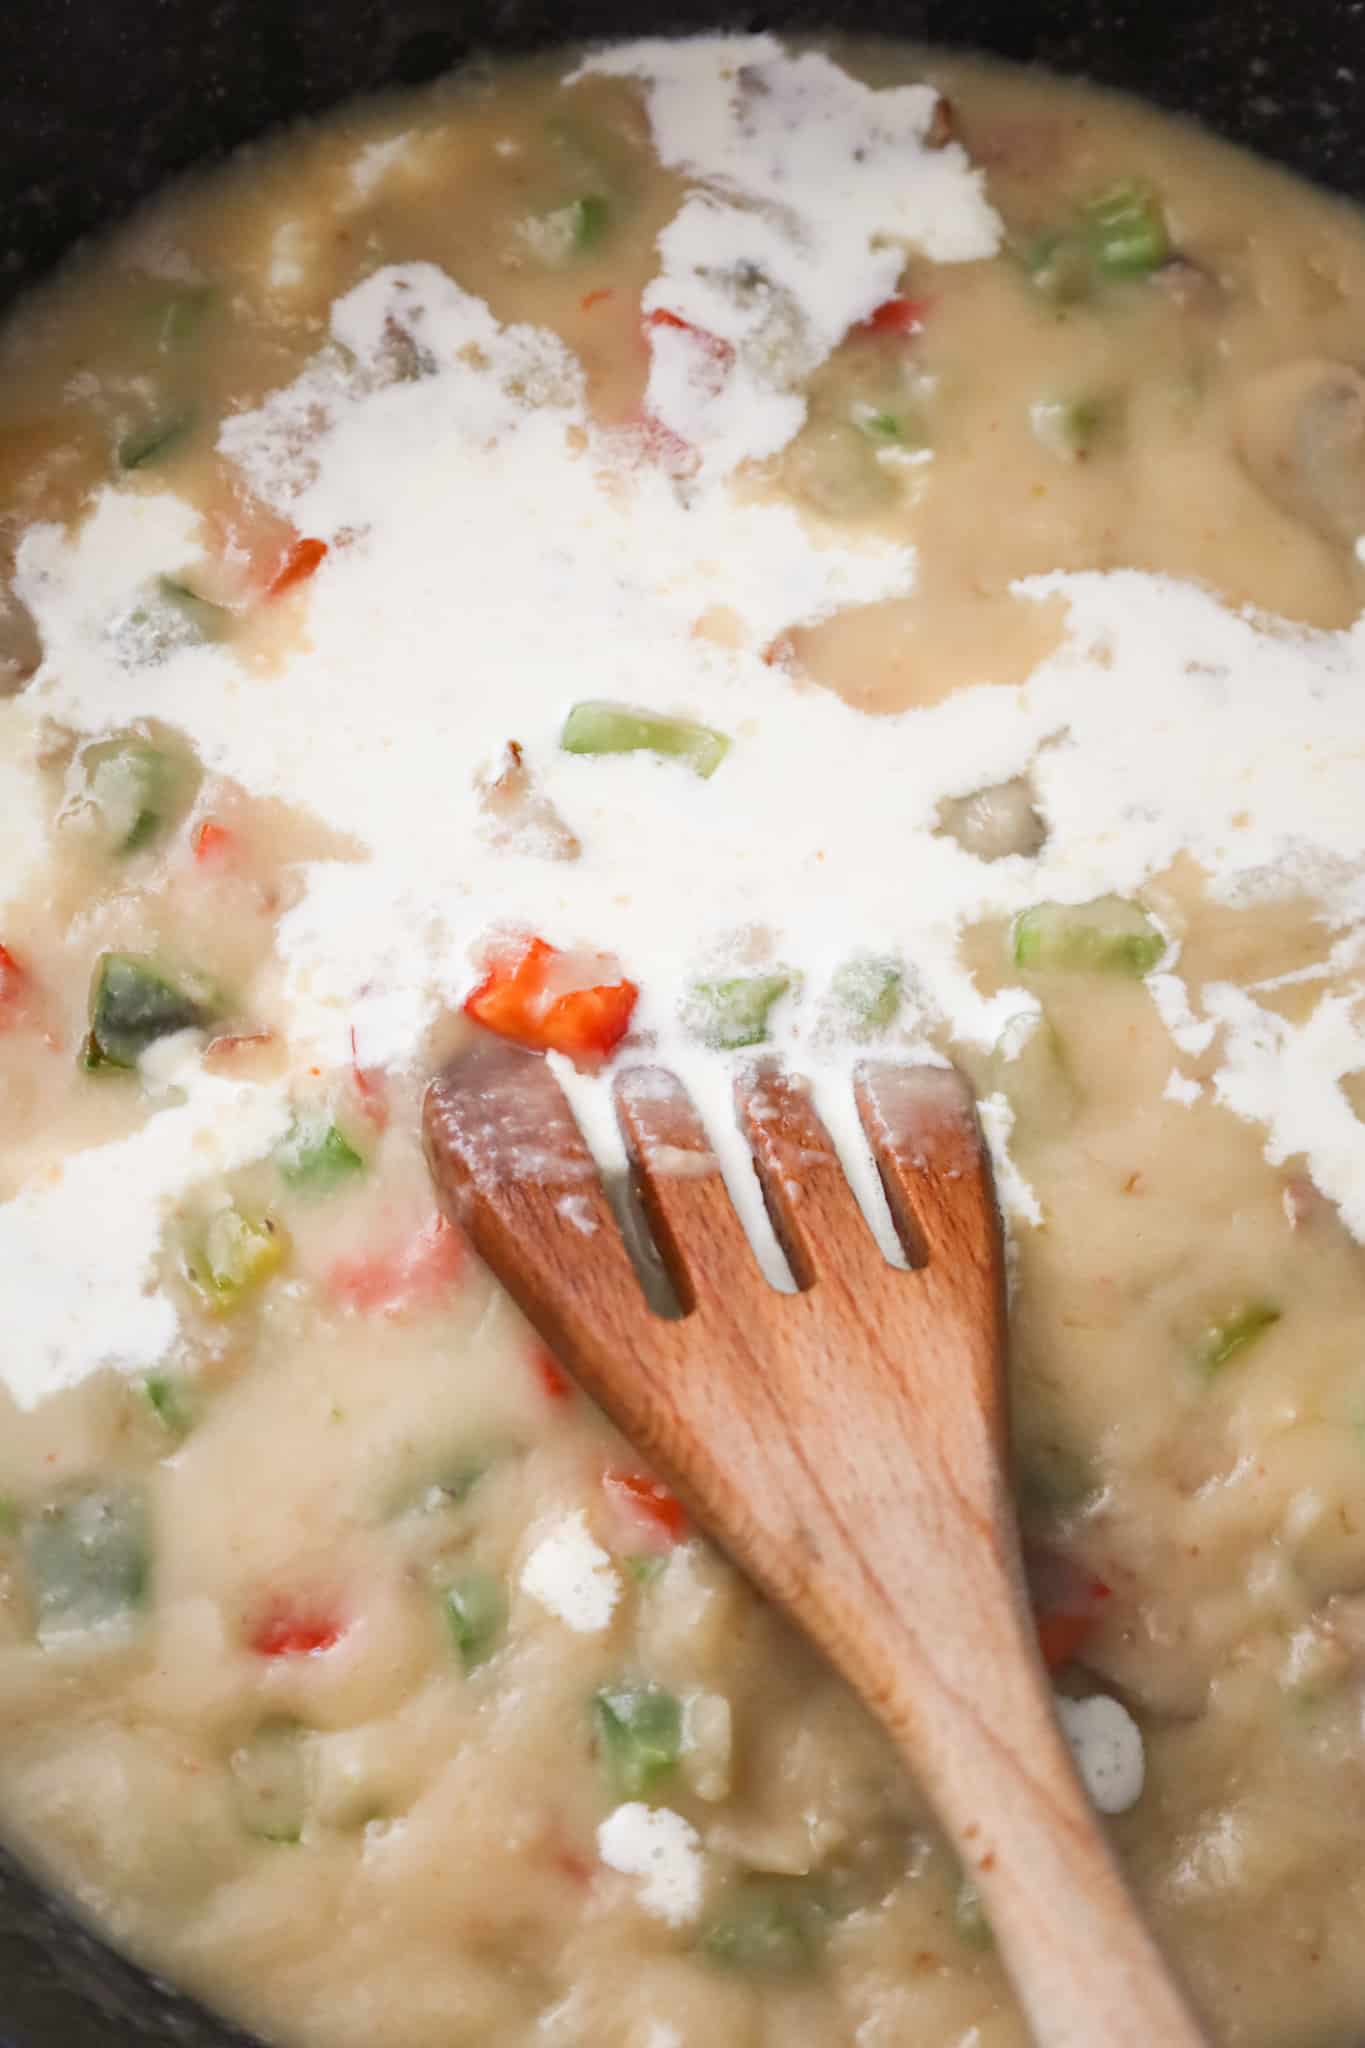 heavy cream added to thick broth mixture in a skillet